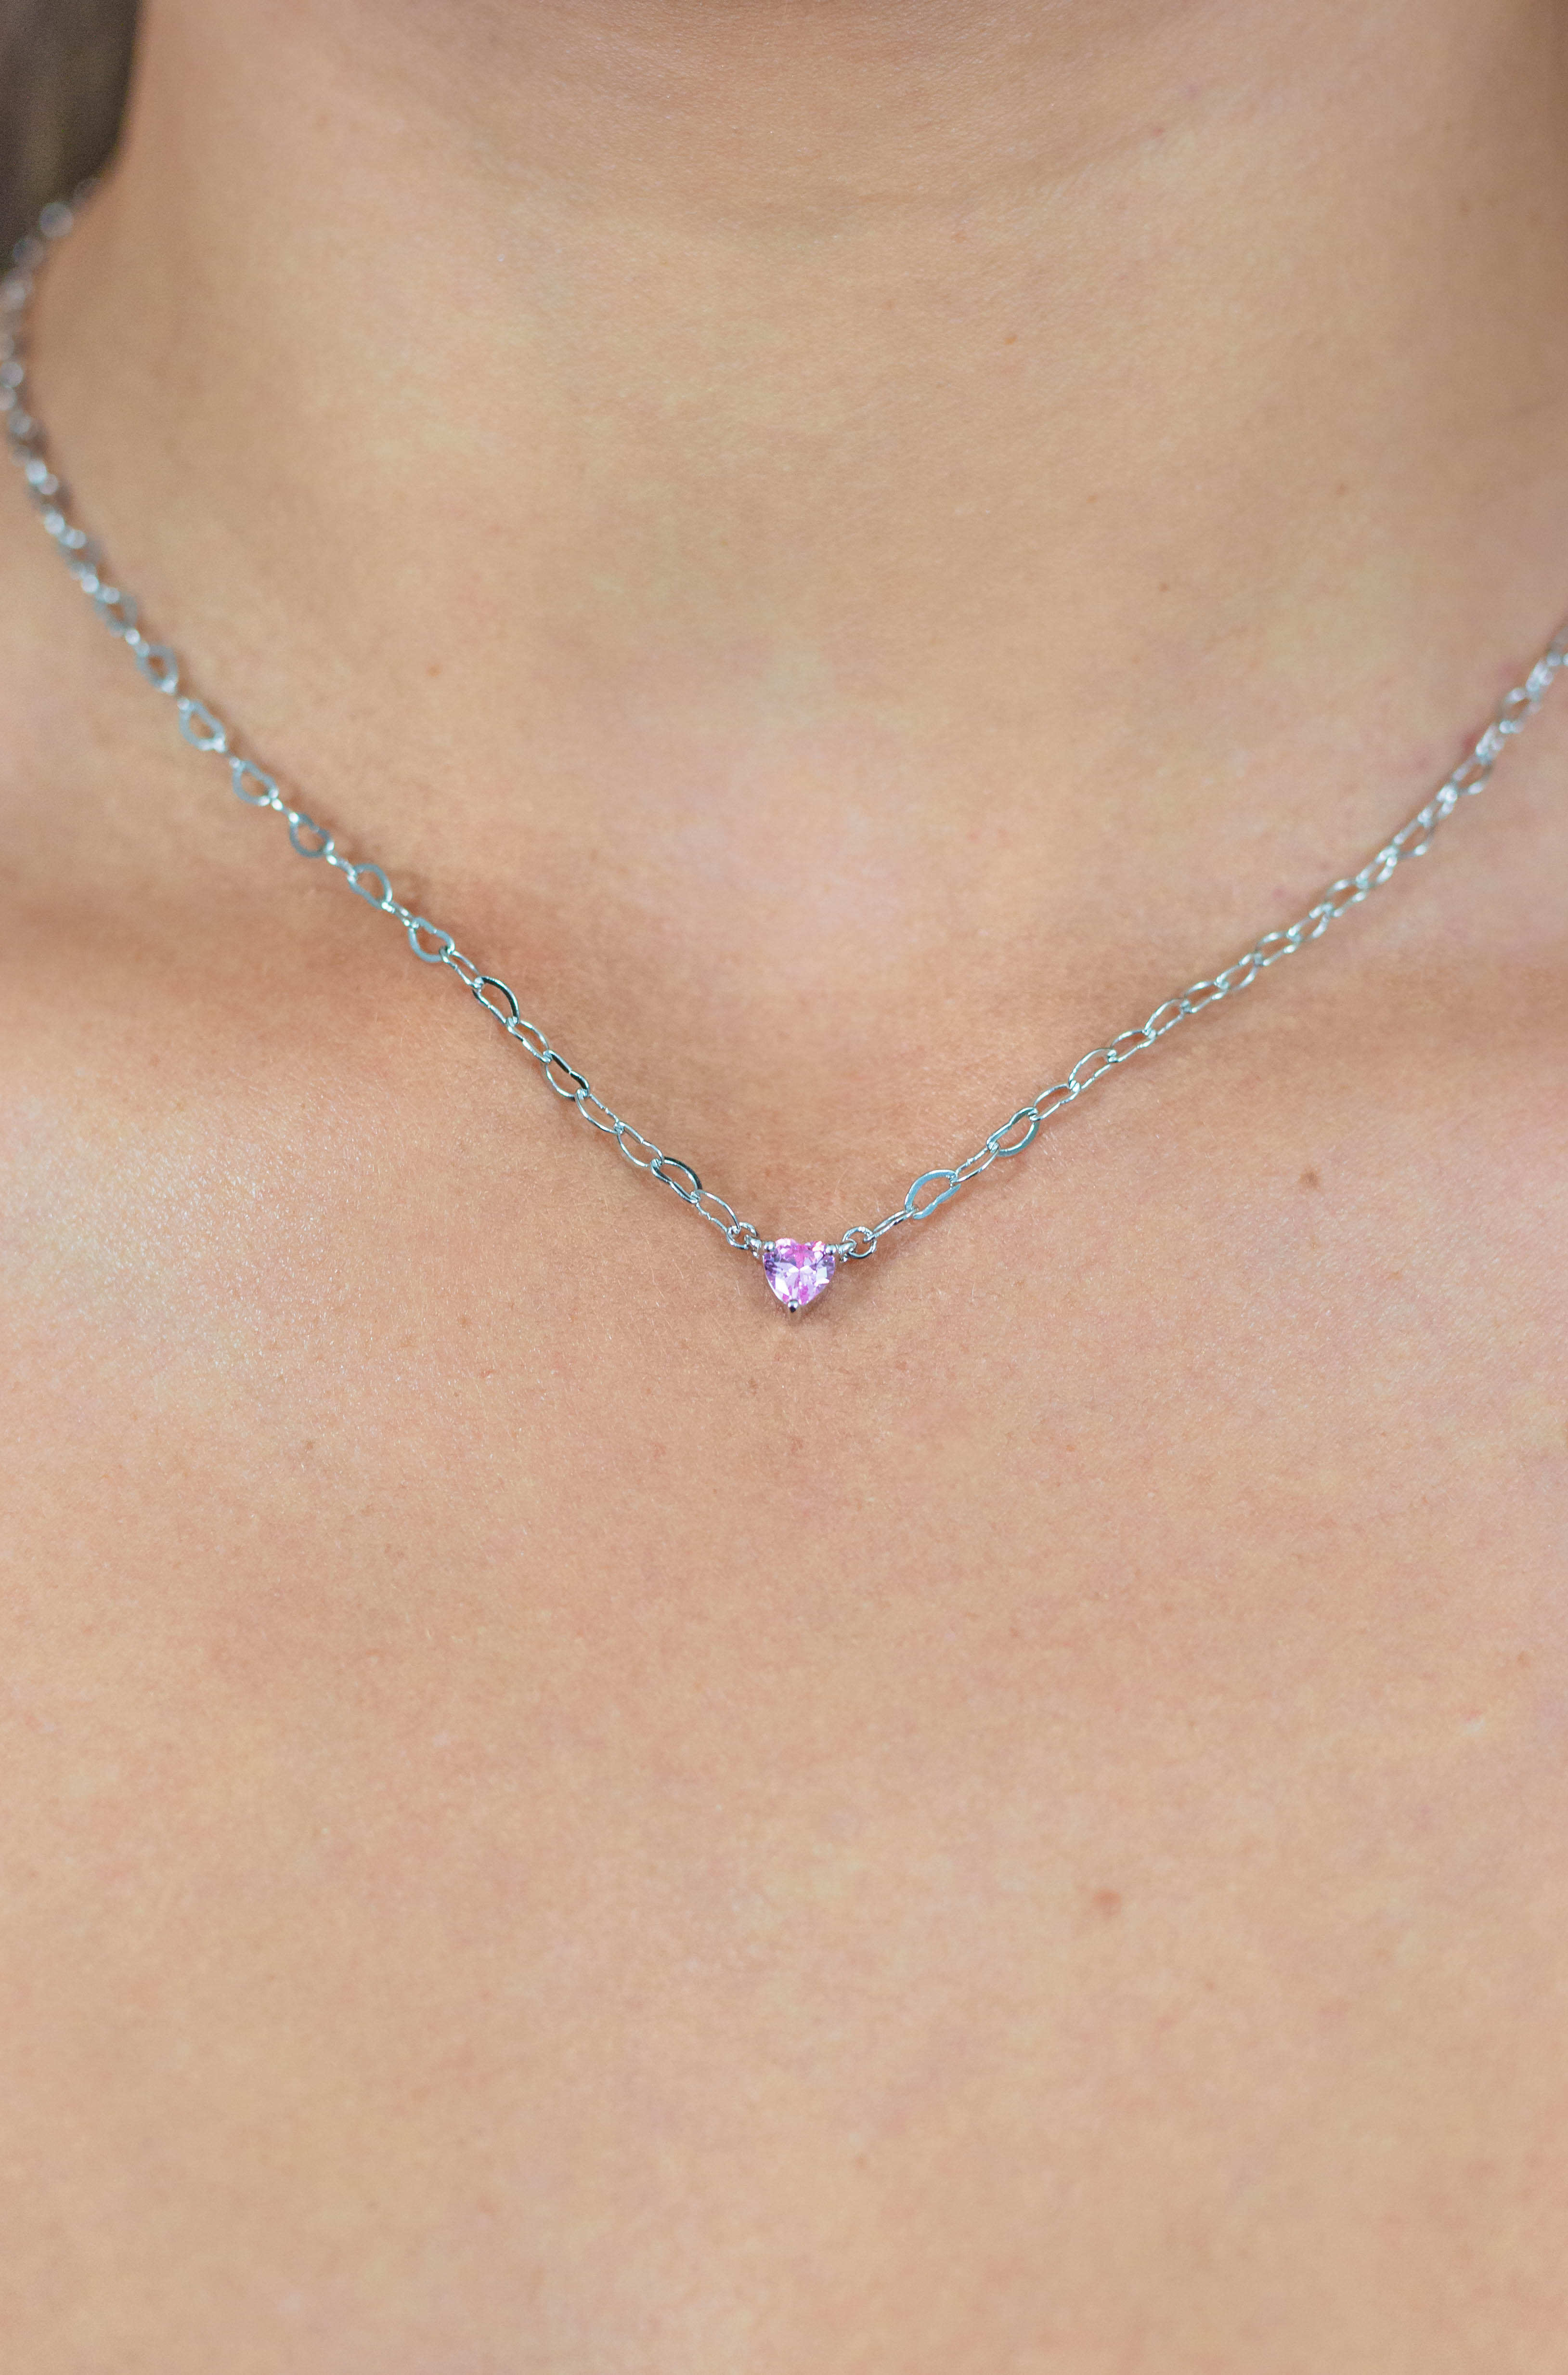 SWEETHEART HEART CHAIN NECKLACE PINK SILVER